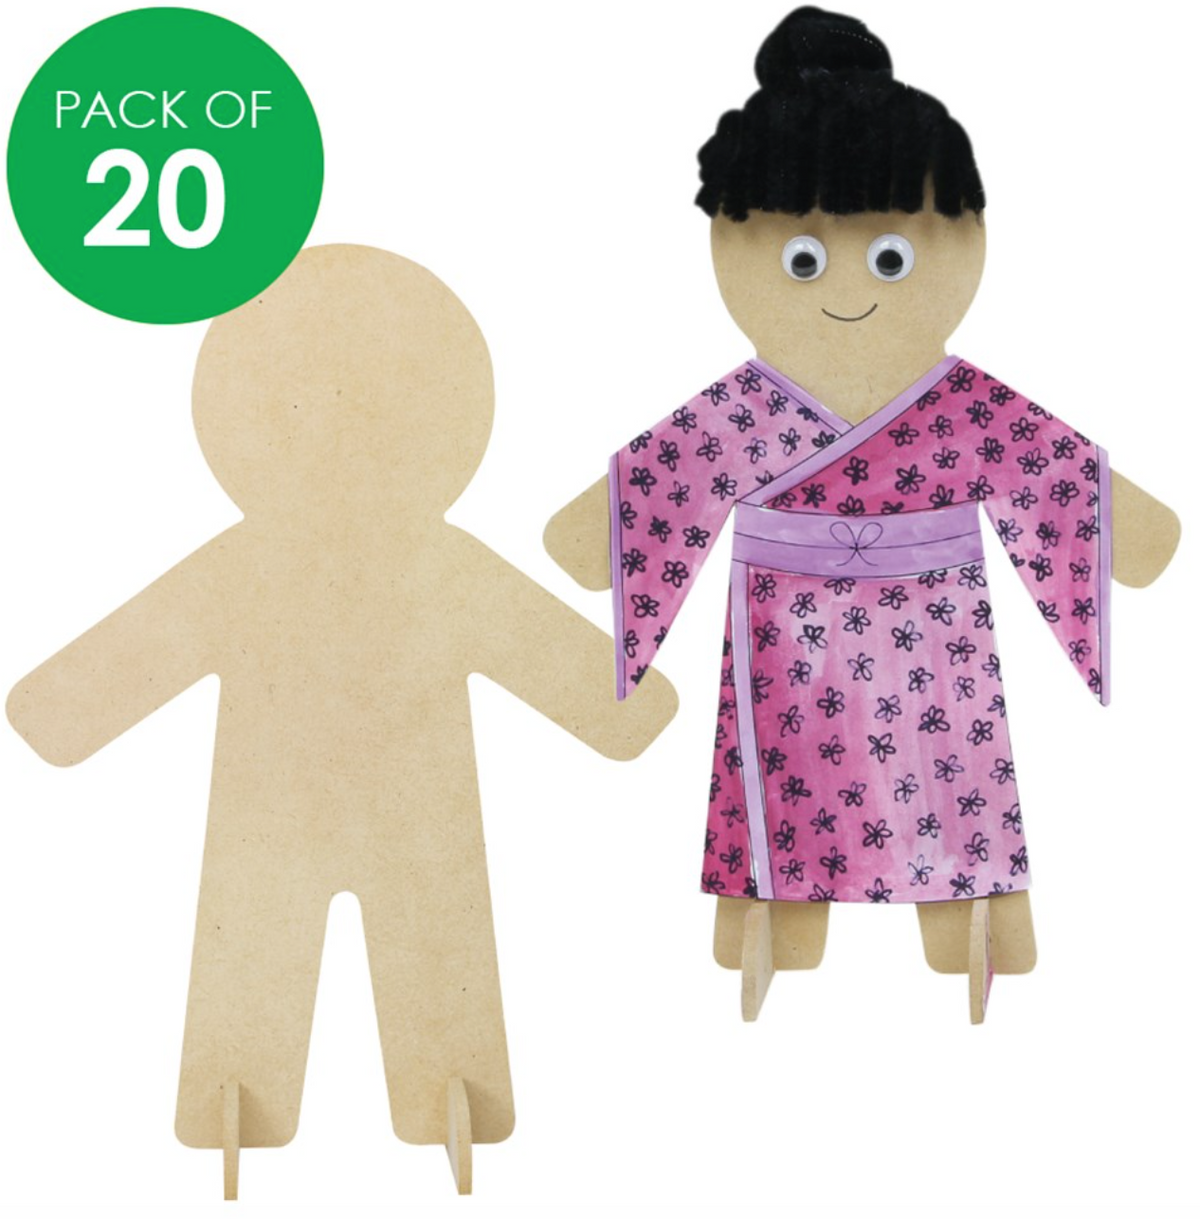 3D Wooden People - Pack of 20